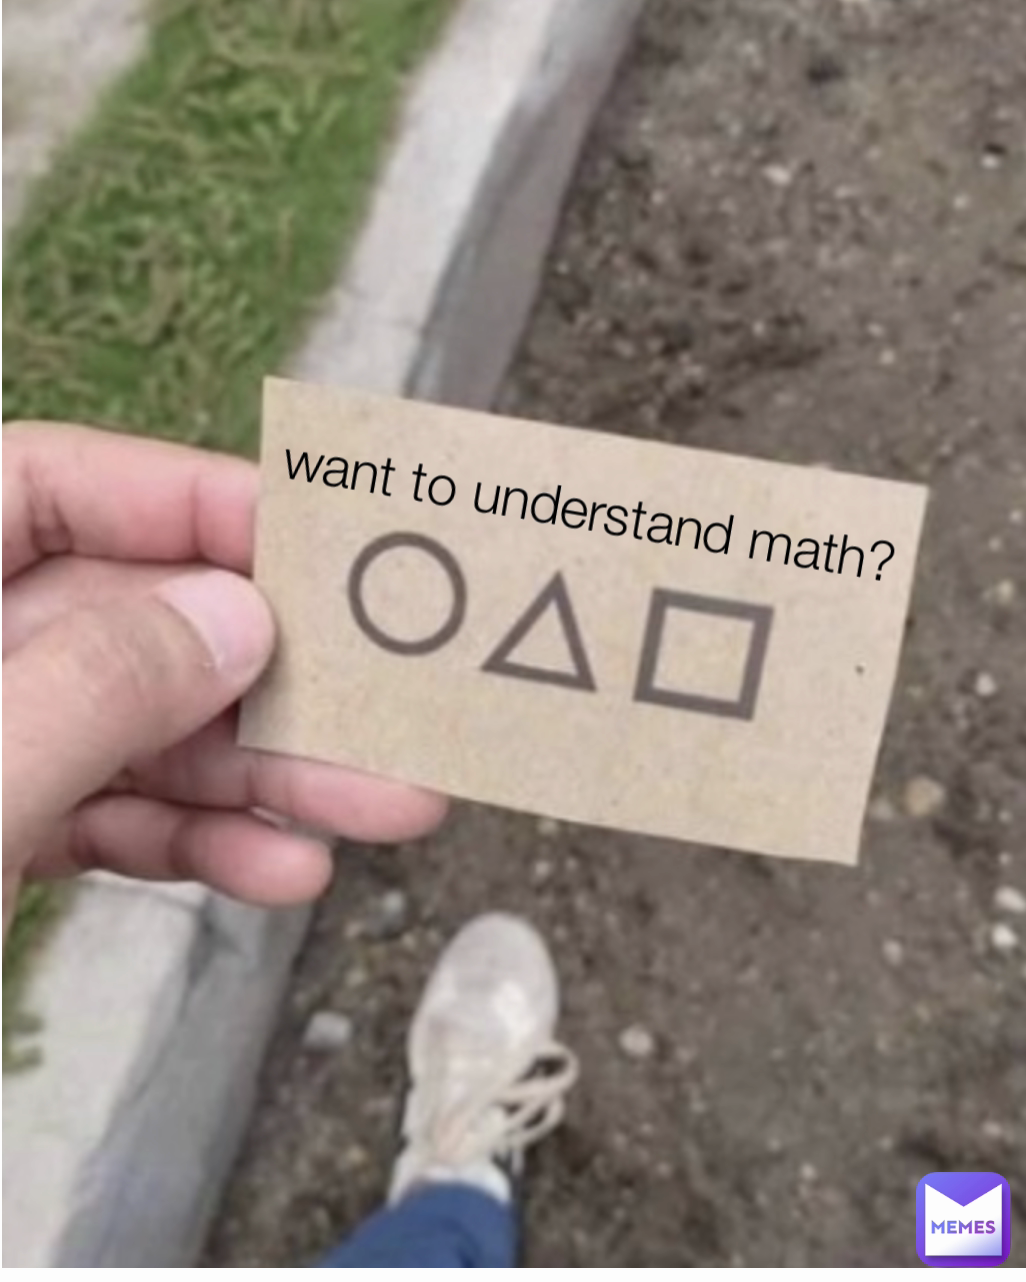 want to understand math?